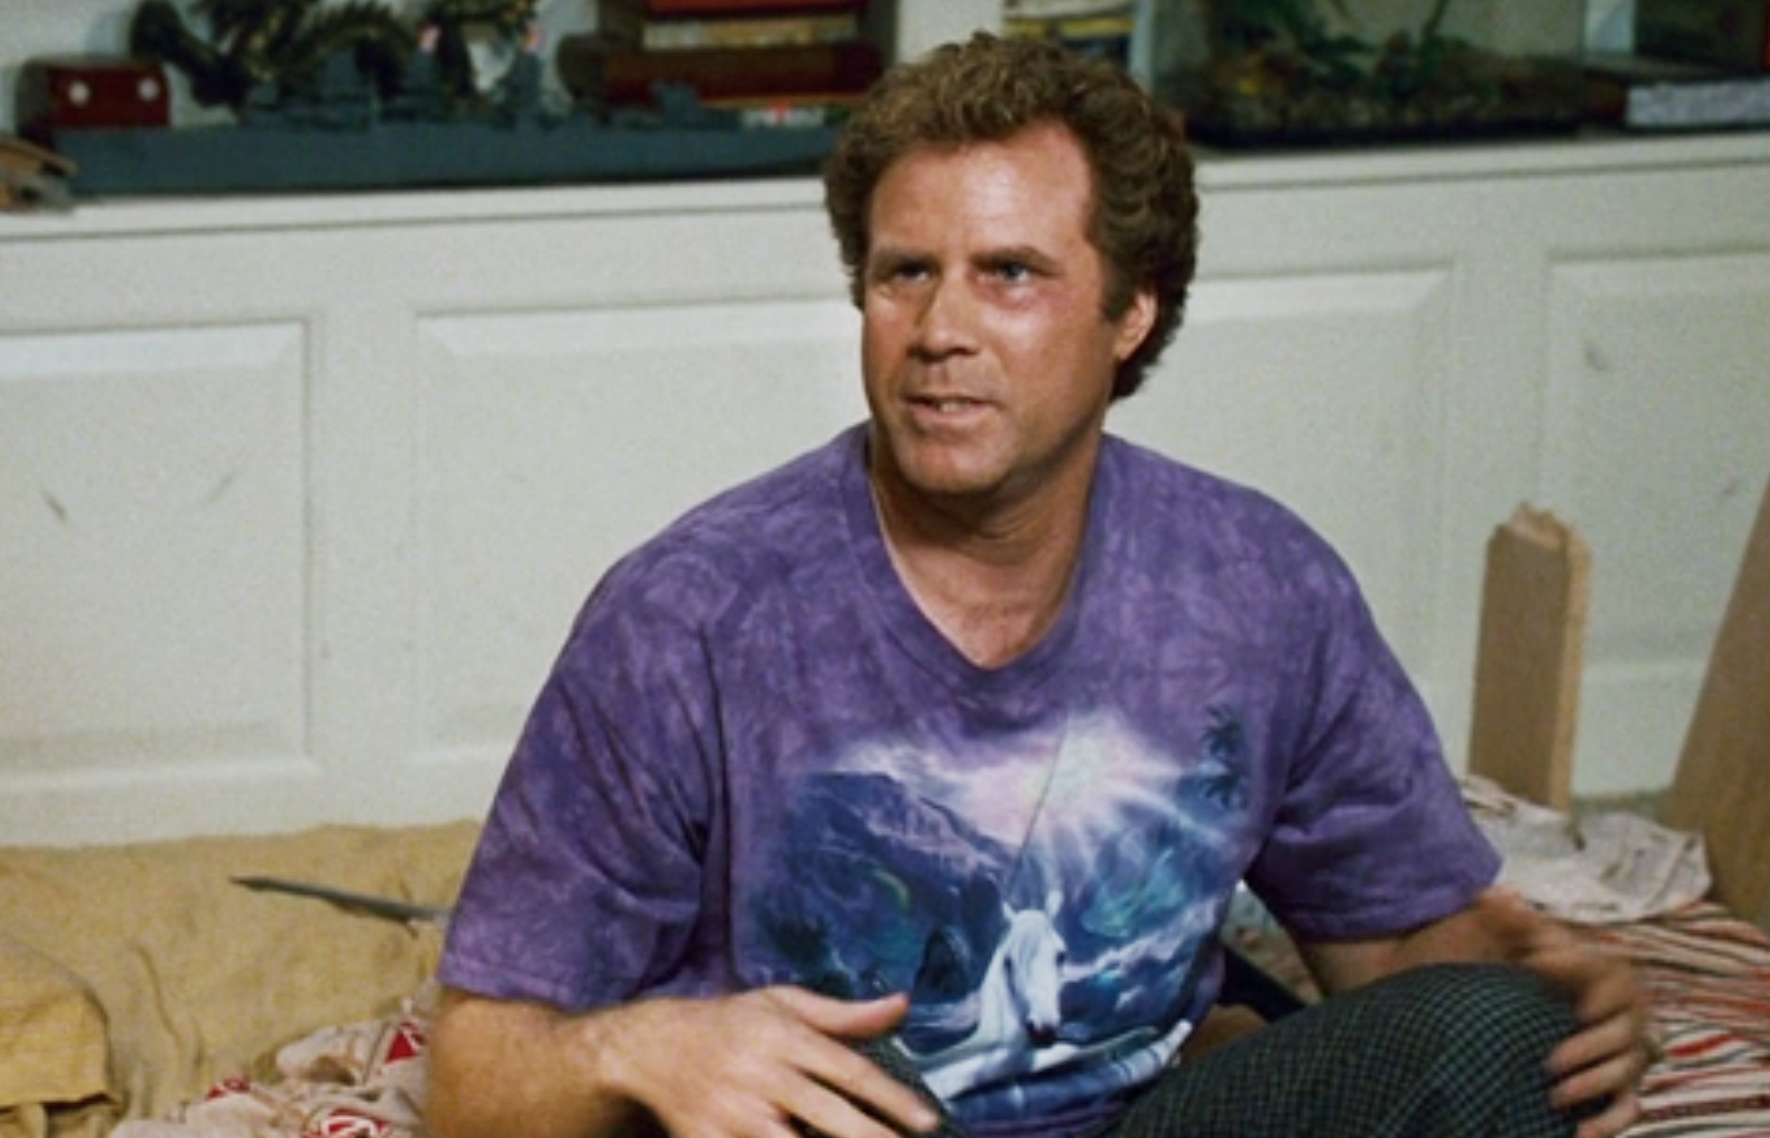 Brennan Huff (Will Ferrell) wears a t-shirt with a white horse on it&nb...